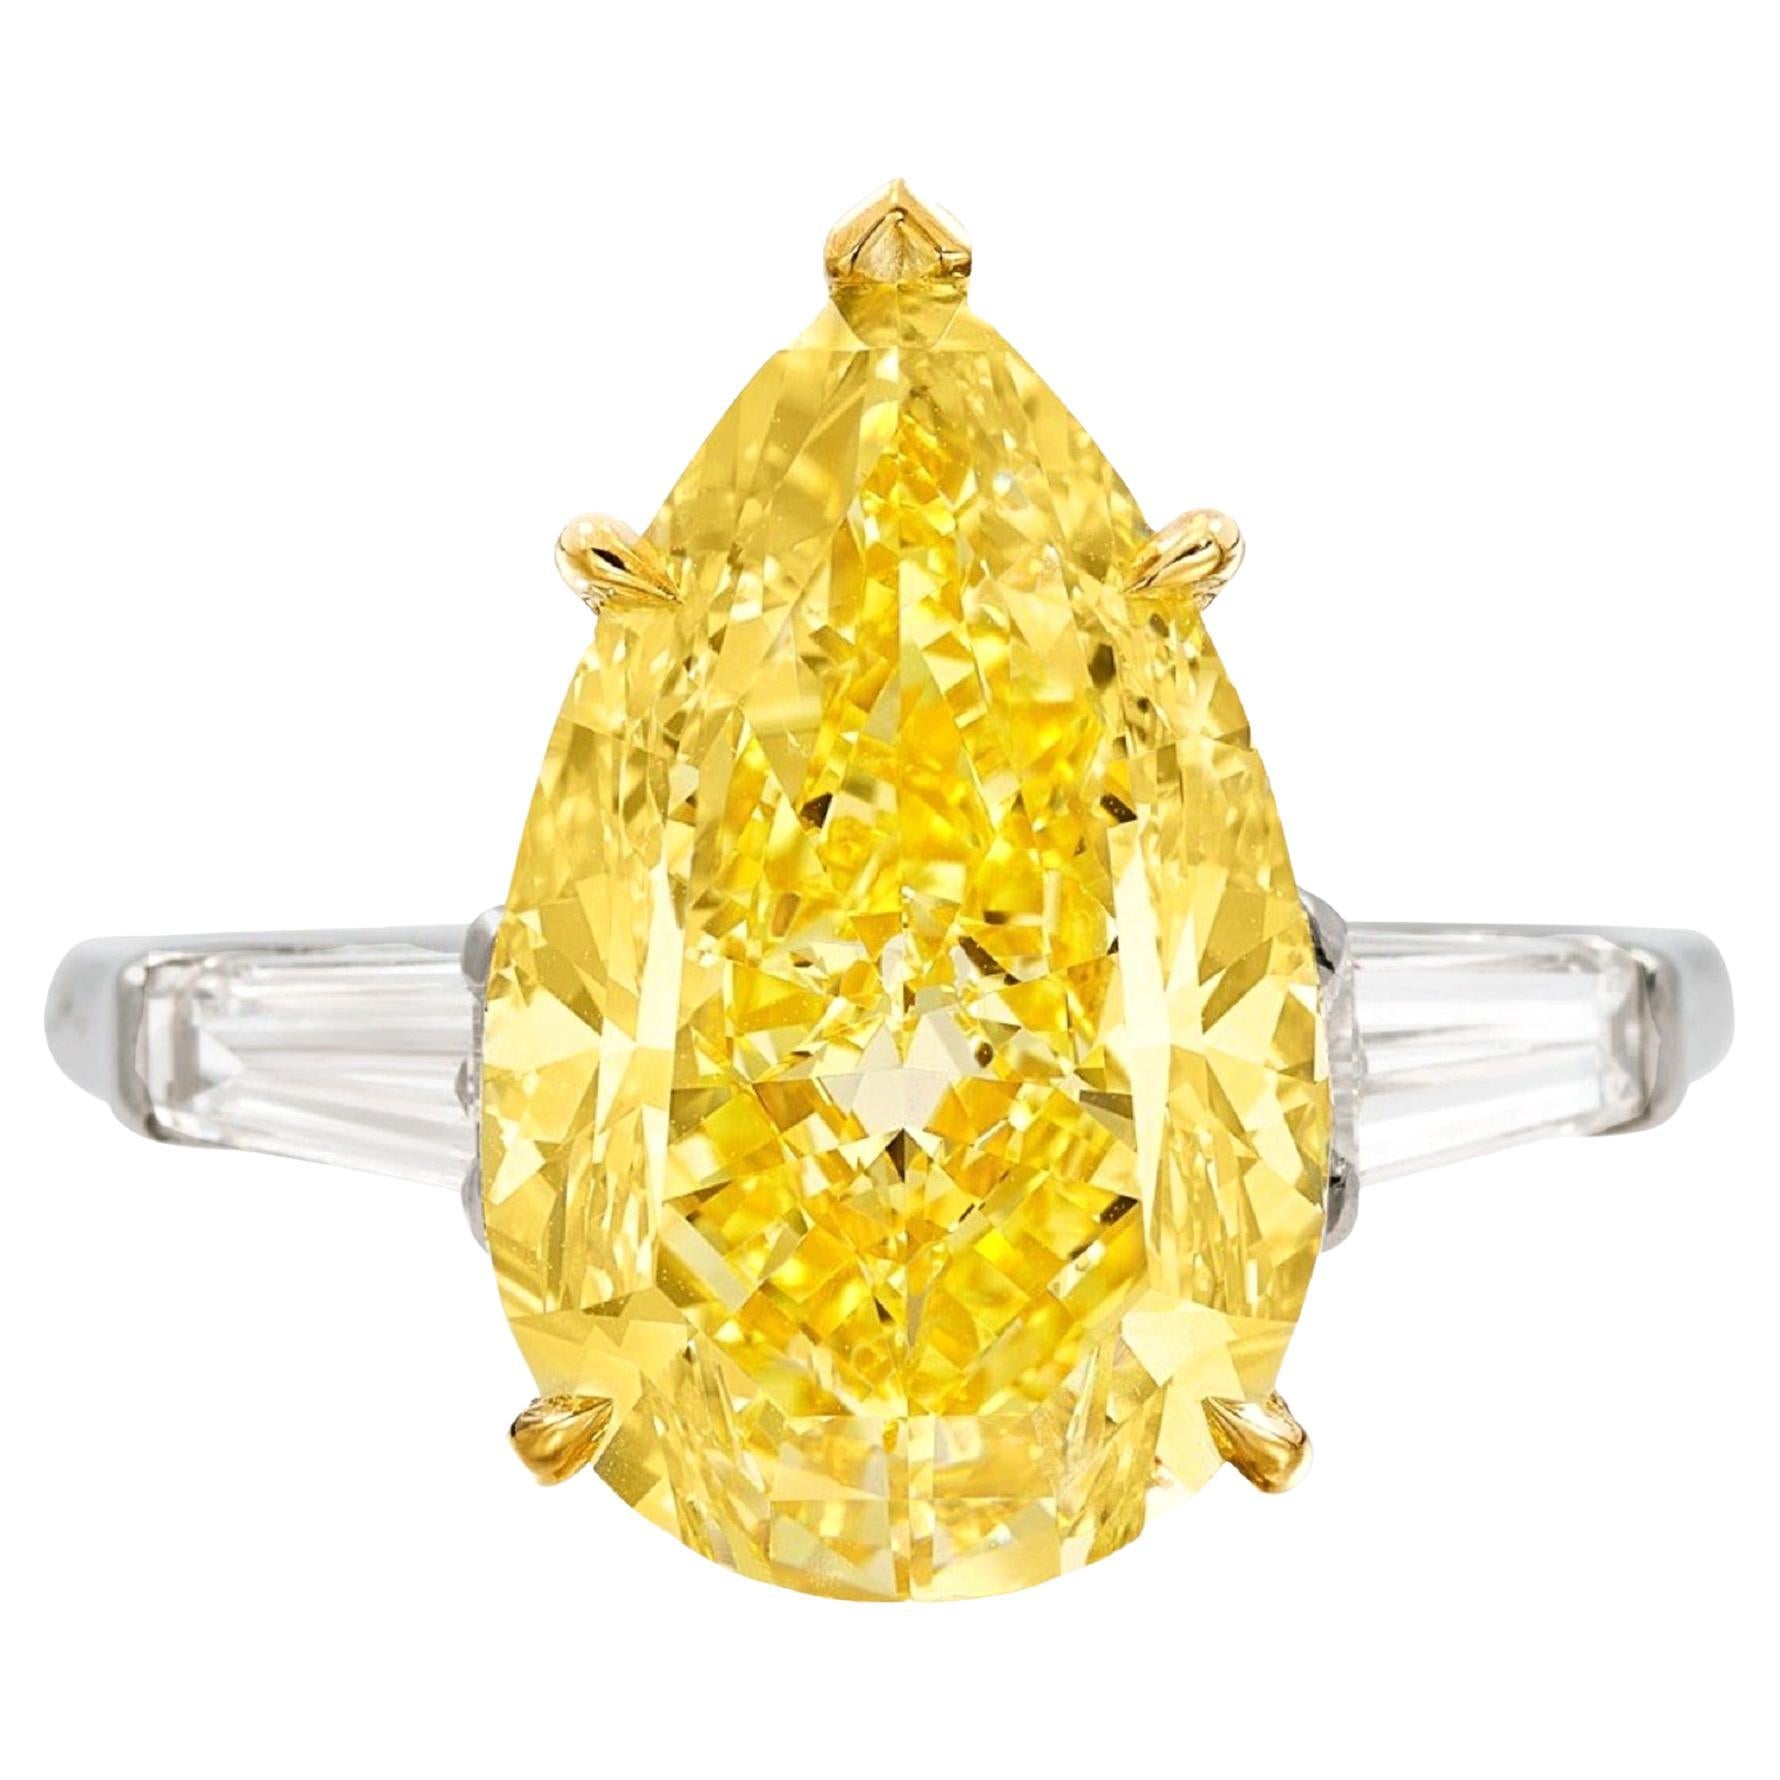 GIA Certified 8.25 Carat Fancy Intense Yellow Diamond Solitaire Ring For Sale